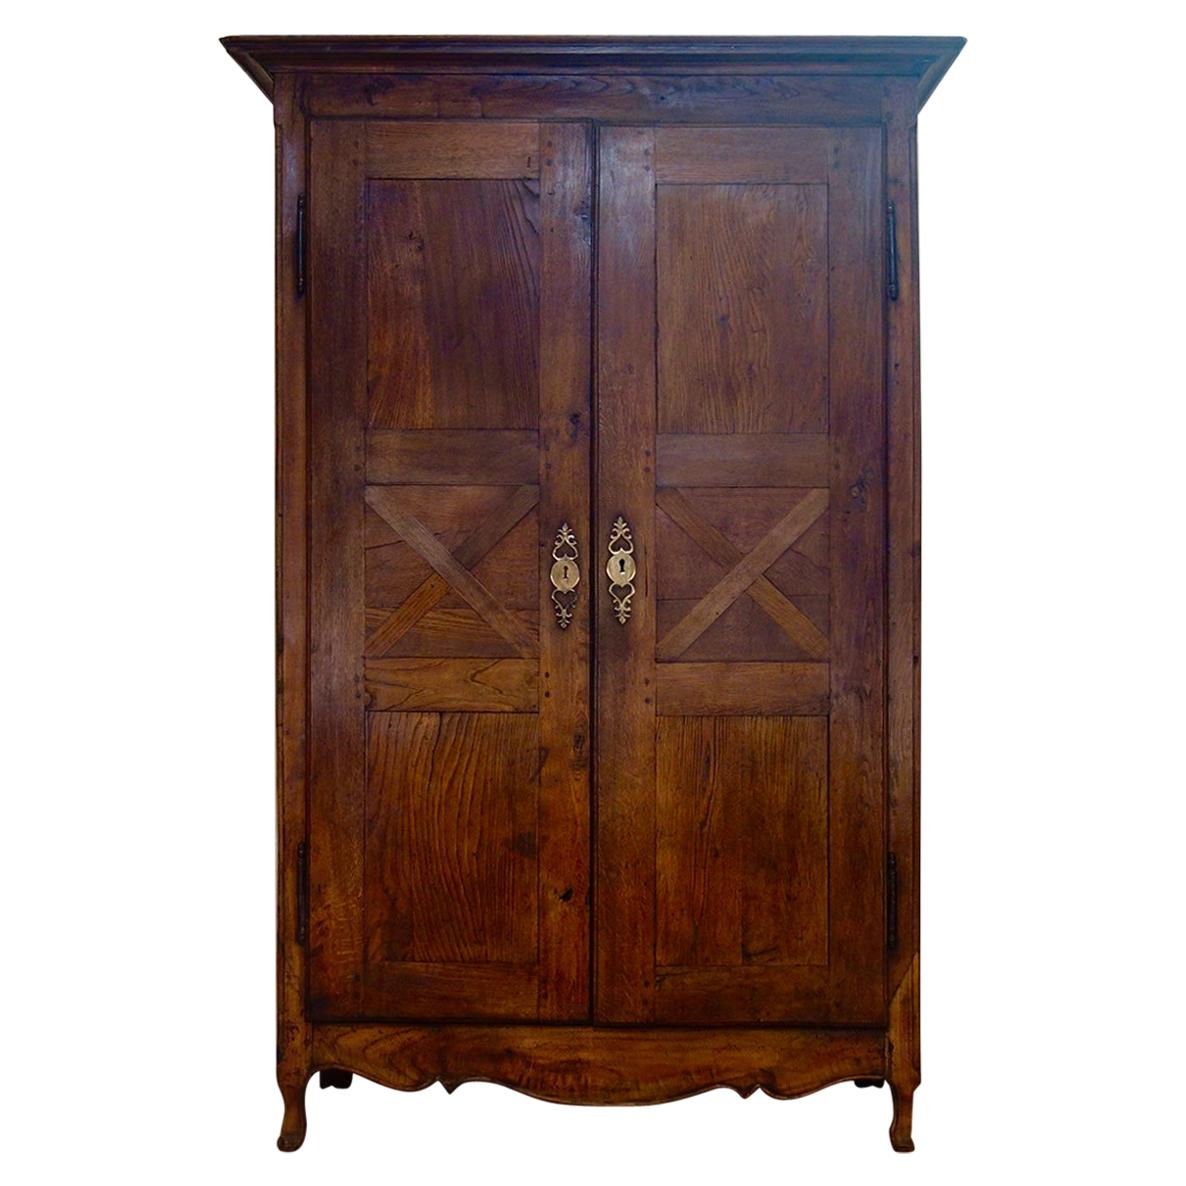 Charming Late 18th Century French Provincial Oak Armoire, Wardrobe